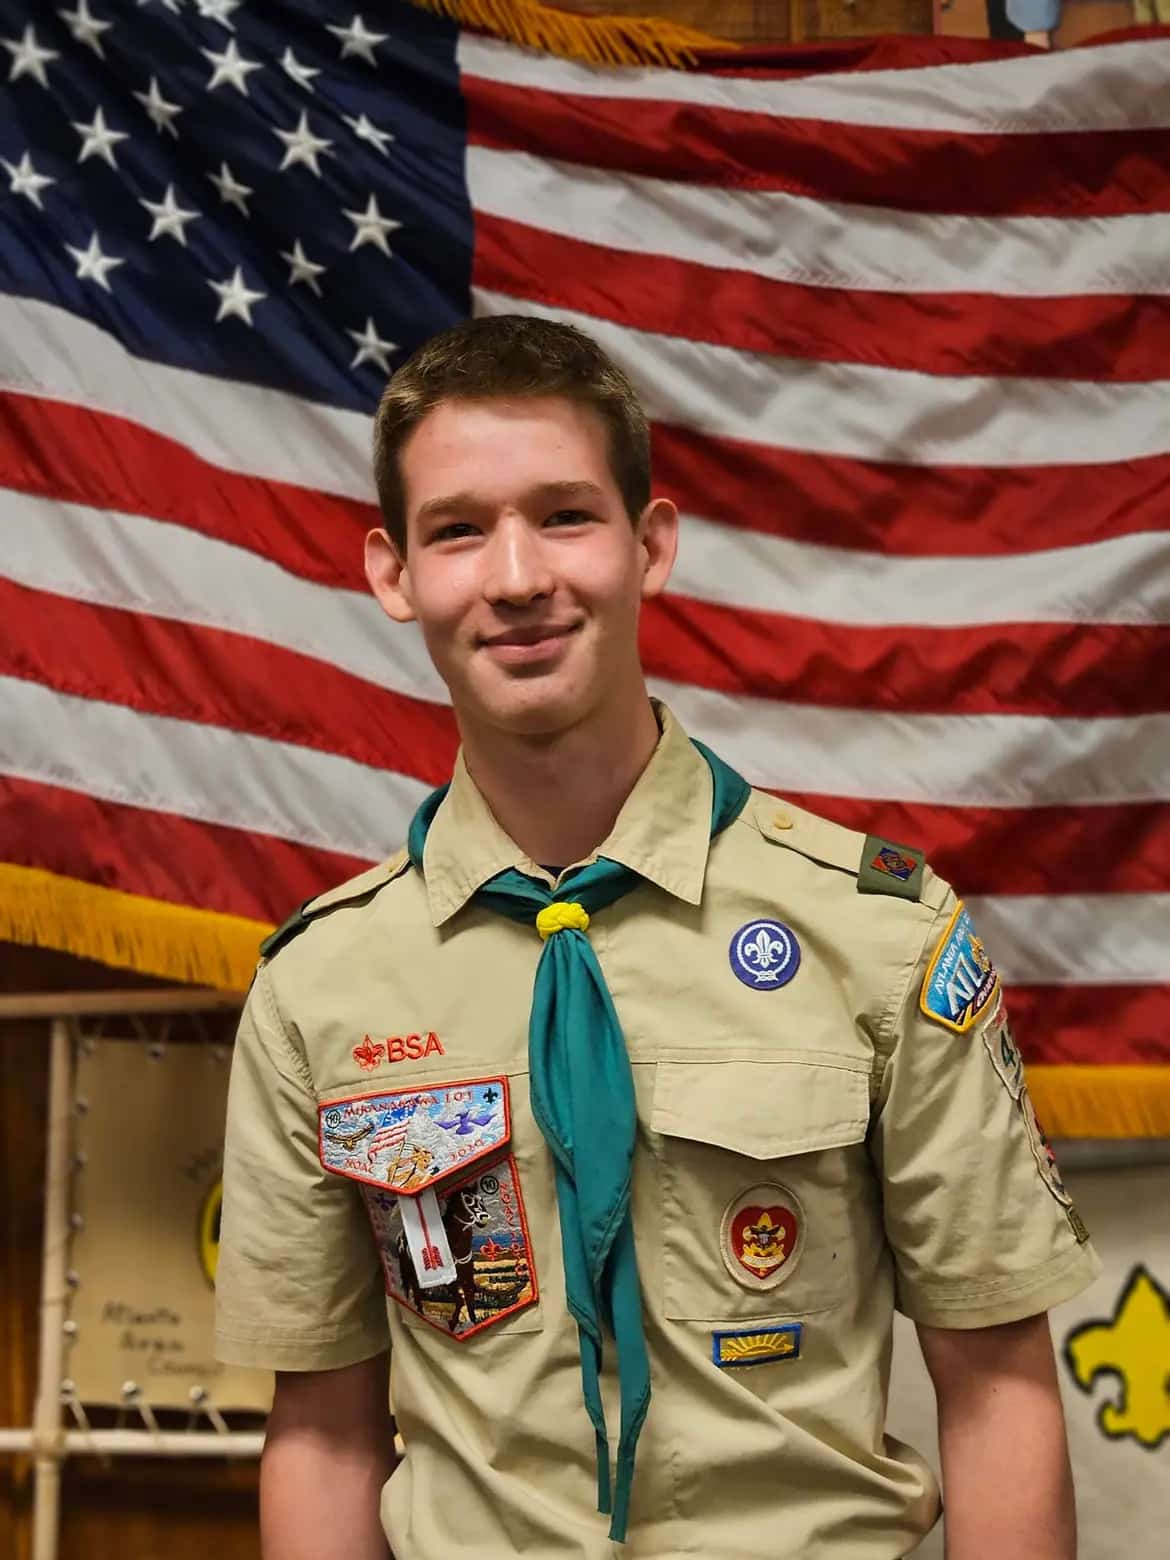 Pinecrest Academy 10th grader, Ryan Kress, completed an extensive service project on March 28 which earned him the honor of Eagle Scout.